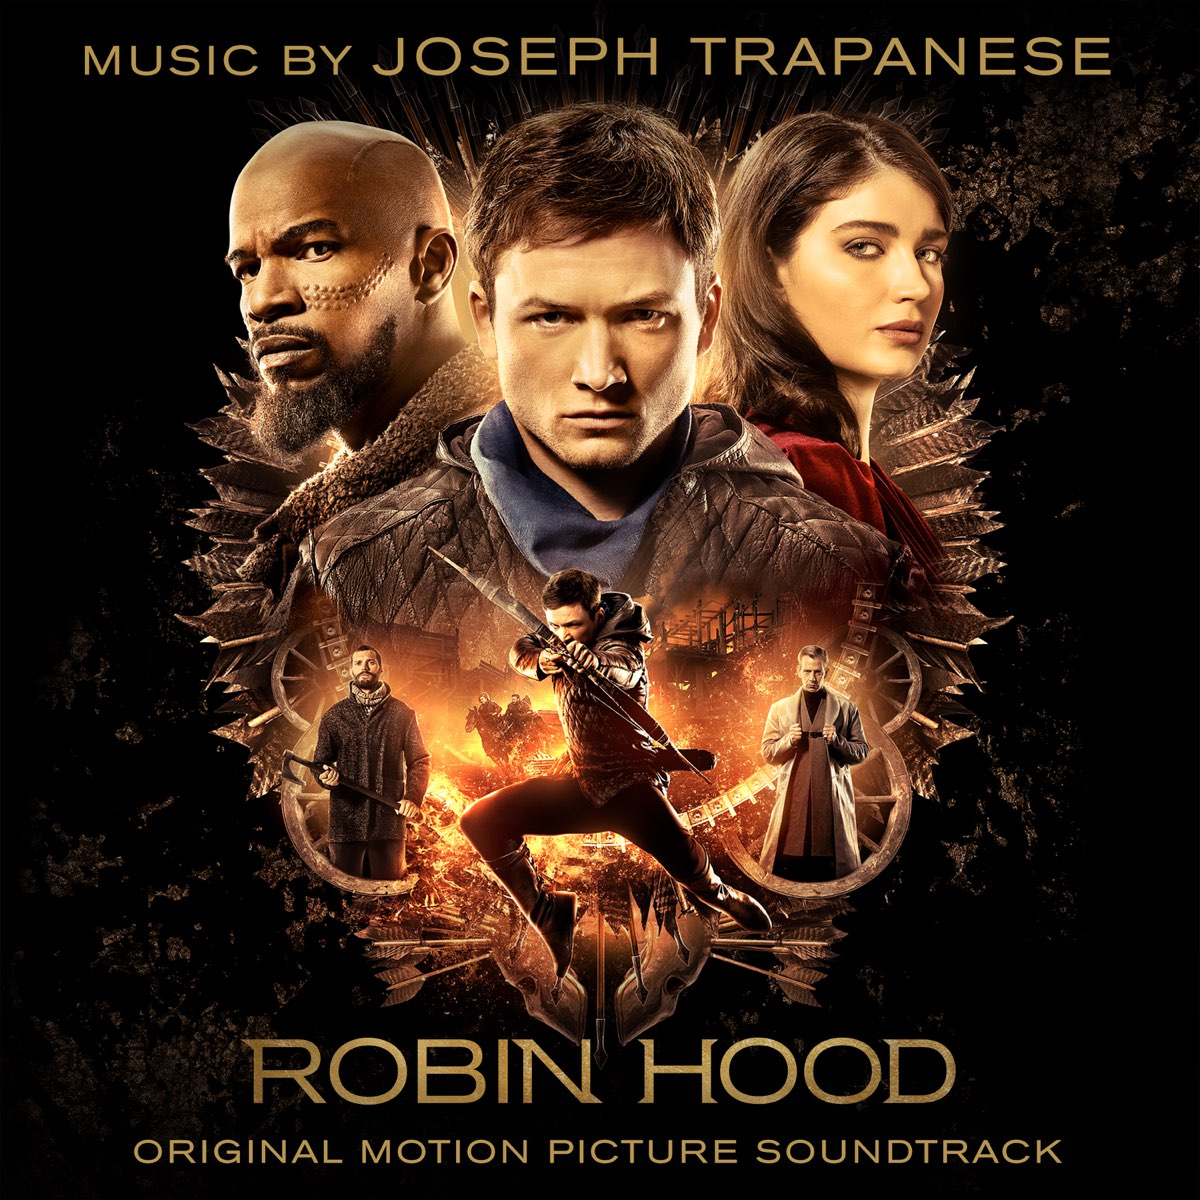 Robin Hood (Original Motion Picture Soundtrack) by Joseph Trapanese on  Apple Music